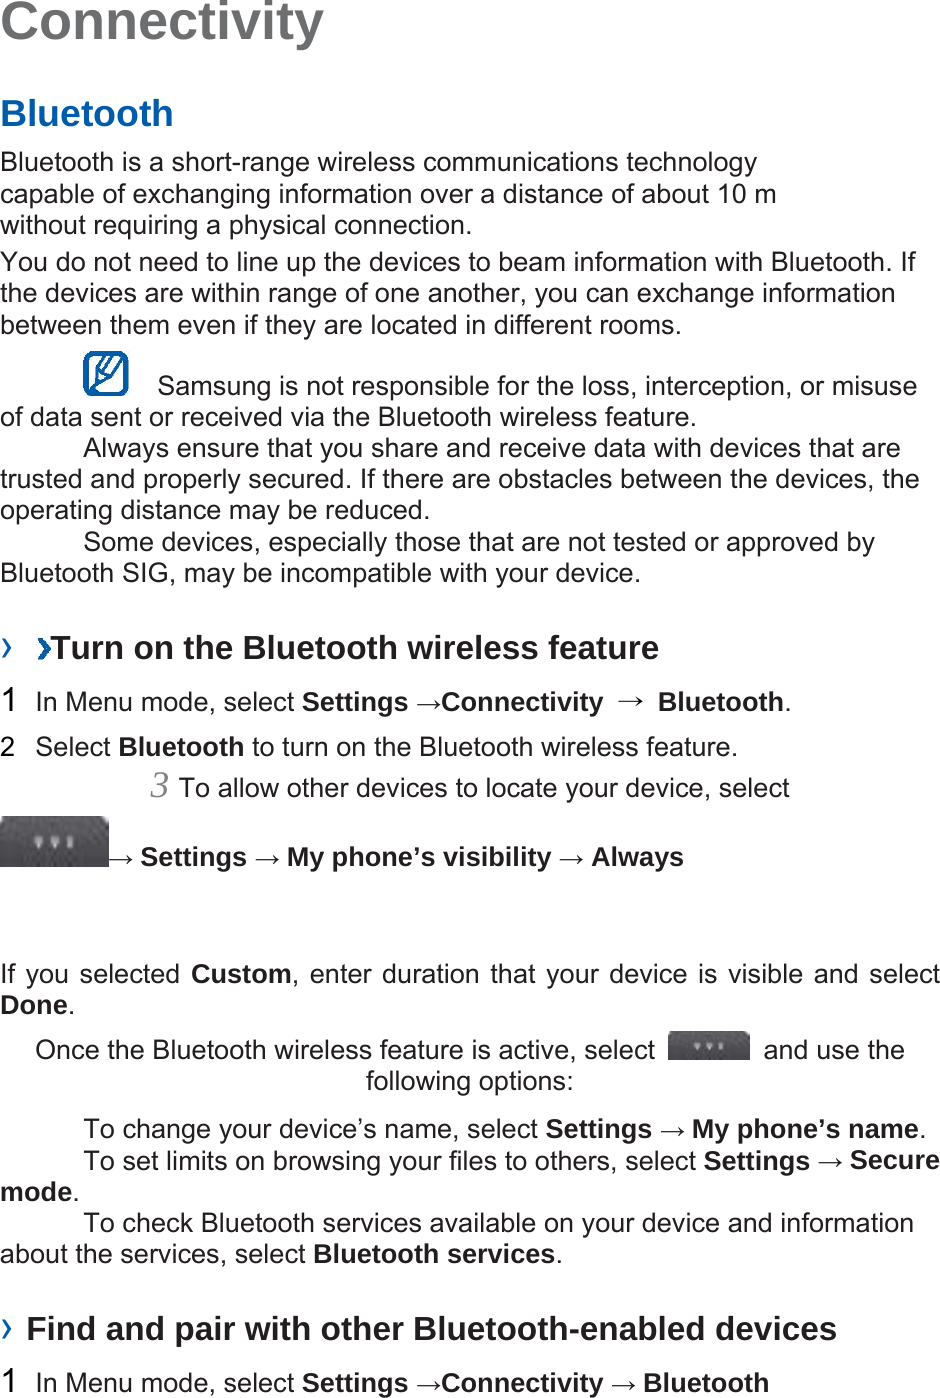 Connectivity   Bluetooth   Bluetooth is a short-range wireless communications technology capable of exchanging information over a distance of about 10 m without requiring a physical connection.   You do not need to line up the devices to beam information with Bluetooth. If the devices are within range of one another, you can exchange information between them even if they are located in different rooms.      Samsung is not responsible for the loss, interception, or misuse of data sent or received via the Bluetooth wireless feature.     Always ensure that you share and receive data with devices that are trusted and properly secured. If there are obstacles between the devices, the operating distance may be reduced.     Some devices, especially those that are not tested or approved by Bluetooth SIG, may be incompatible with your device.    ›  Turn on the Bluetooth wireless feature   1  In Menu mode, select Settings →Connectivity  → Bluetooth.  2  Select Bluetooth to turn on the Bluetooth wireless feature.   3 To allow other devices to locate your device, select   → Settings → My phone’s visibility → Always   If you selected Custom, enter duration that your device is visible and select Done.  Once the Bluetooth wireless feature is active, select    and use the following options:     To change your device’s name, select Settings → My phone’s name.    To set limits on browsing your files to others, select Settings → Secure mode.    To check Bluetooth services available on your device and information about the services, select Bluetooth services.   › Find and pair with other Bluetooth-enabled devices   1  In Menu mode, select Settings →Connectivity → Bluetooth 